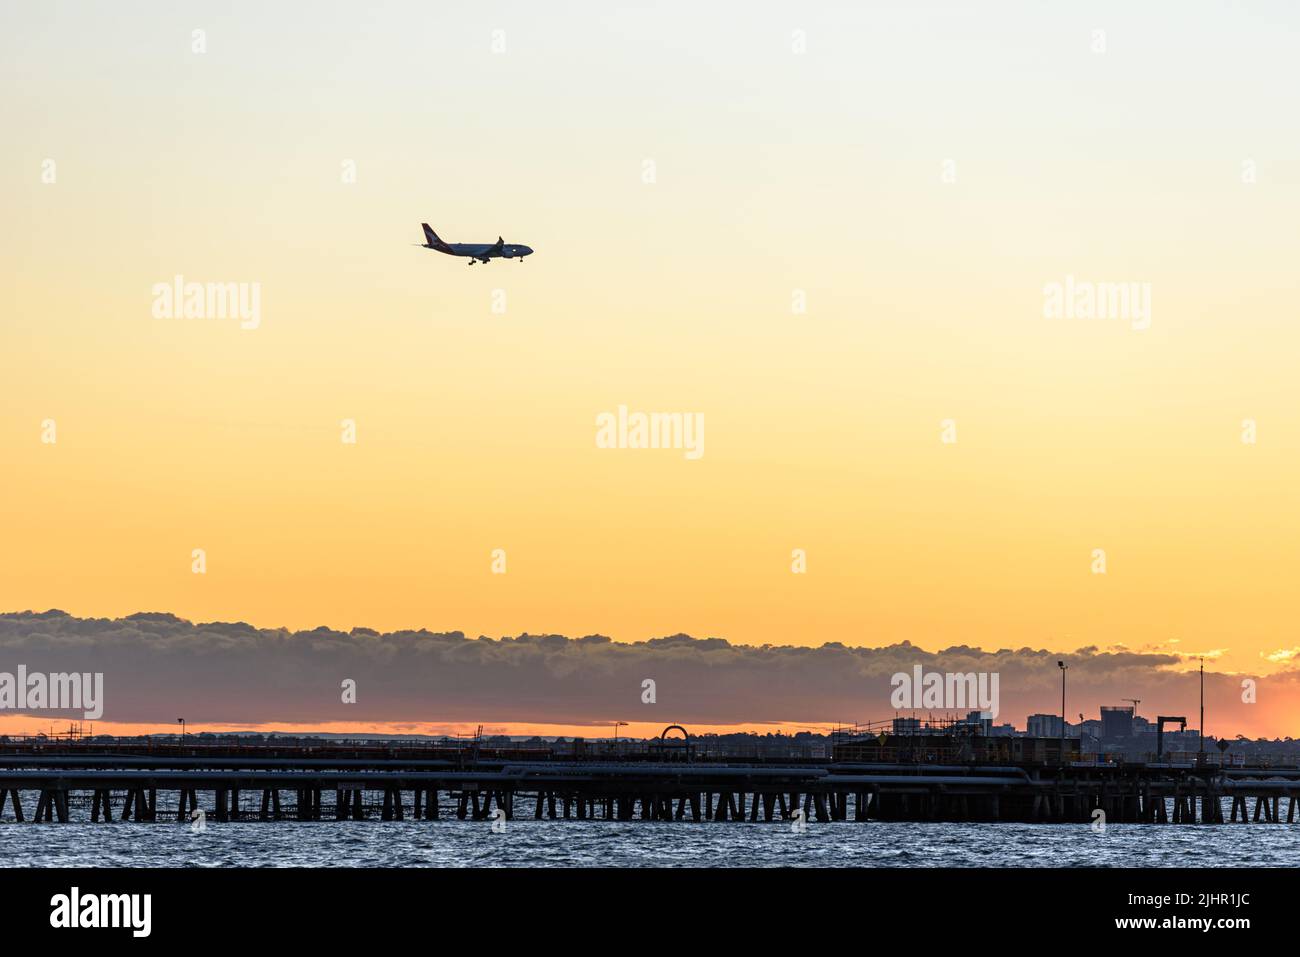 A Qantas plane on its approach to Sydney Airport above Botany Bay at sunset Stock Photo